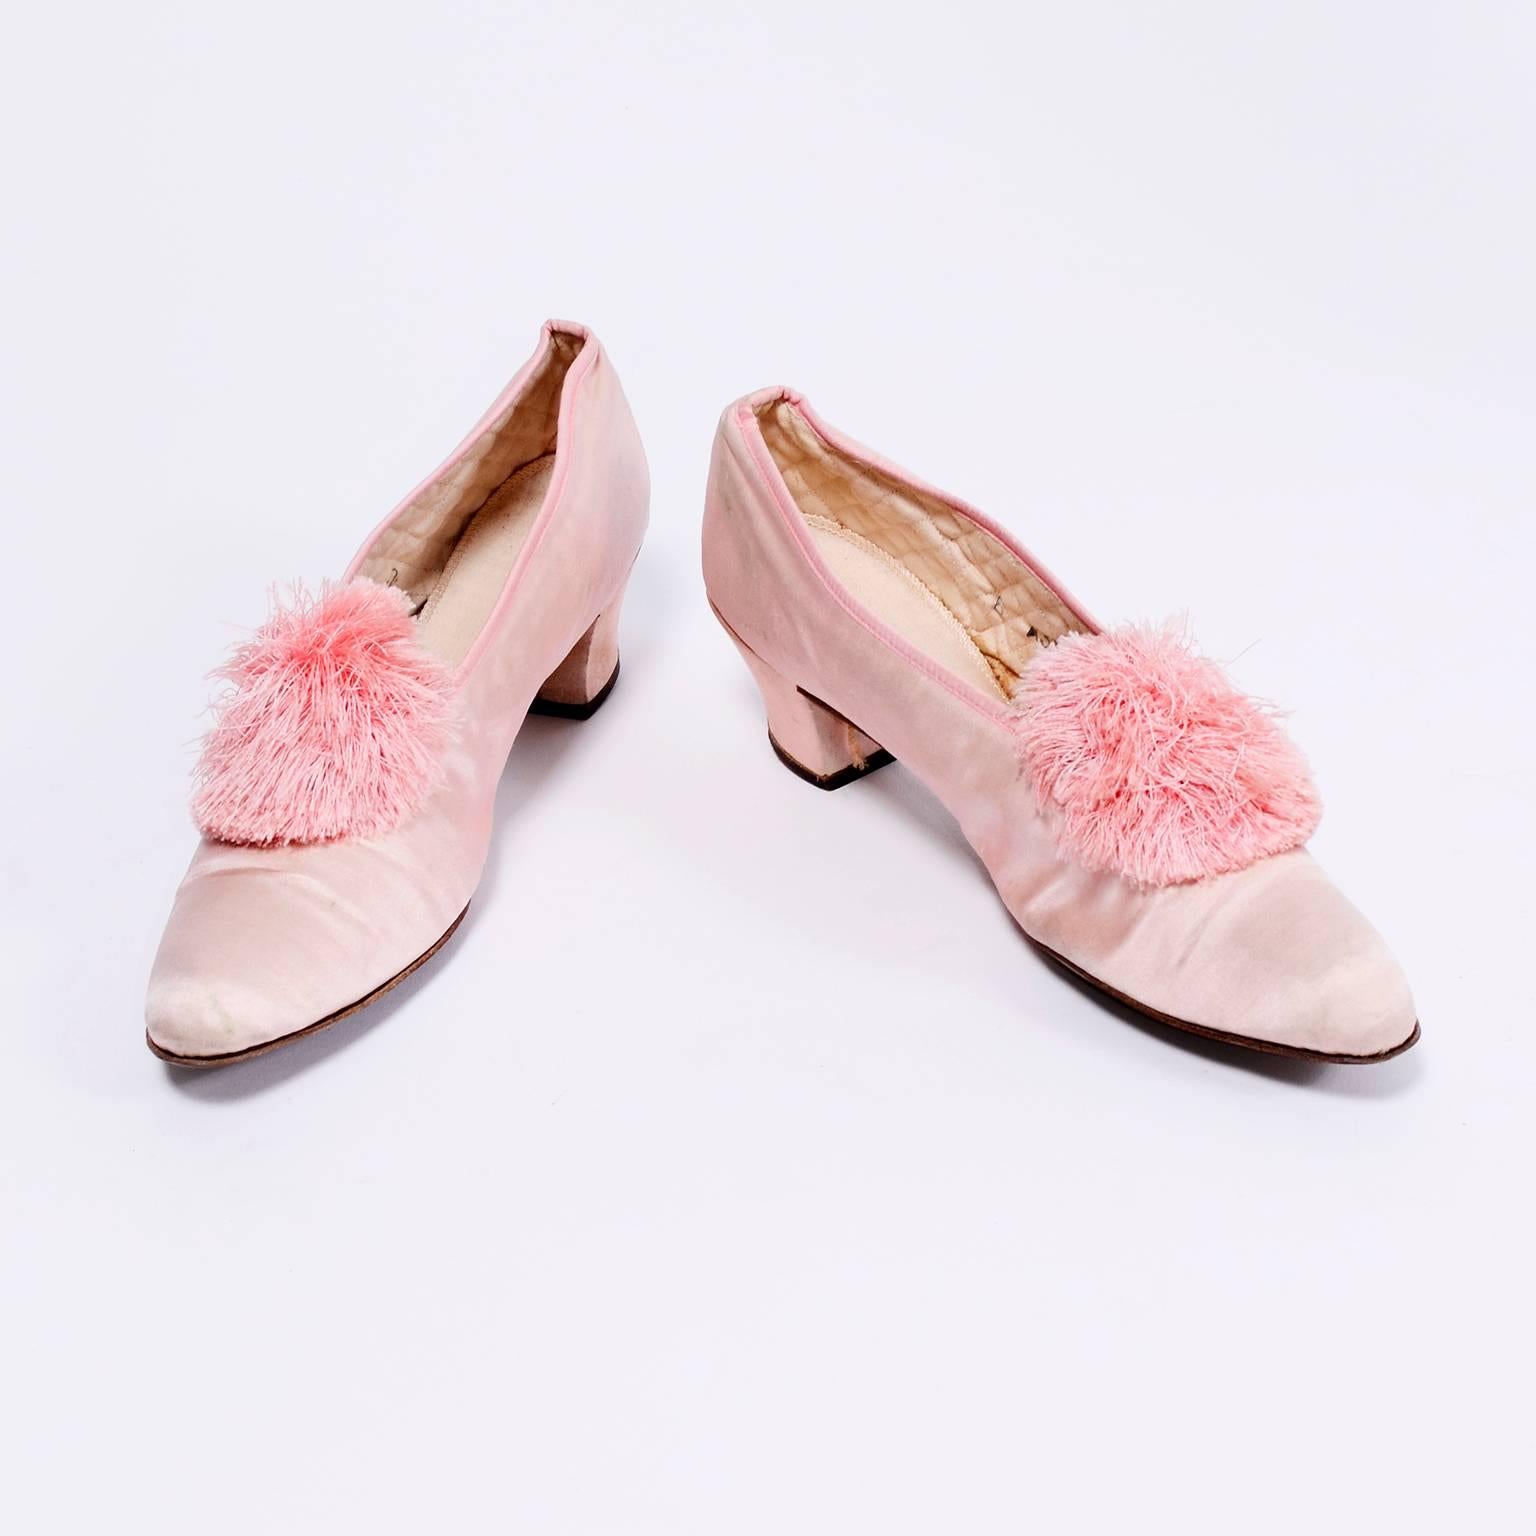 Marshall Field Edwardian Pink Satin Vintage Shoes With Pom Poms 7 3